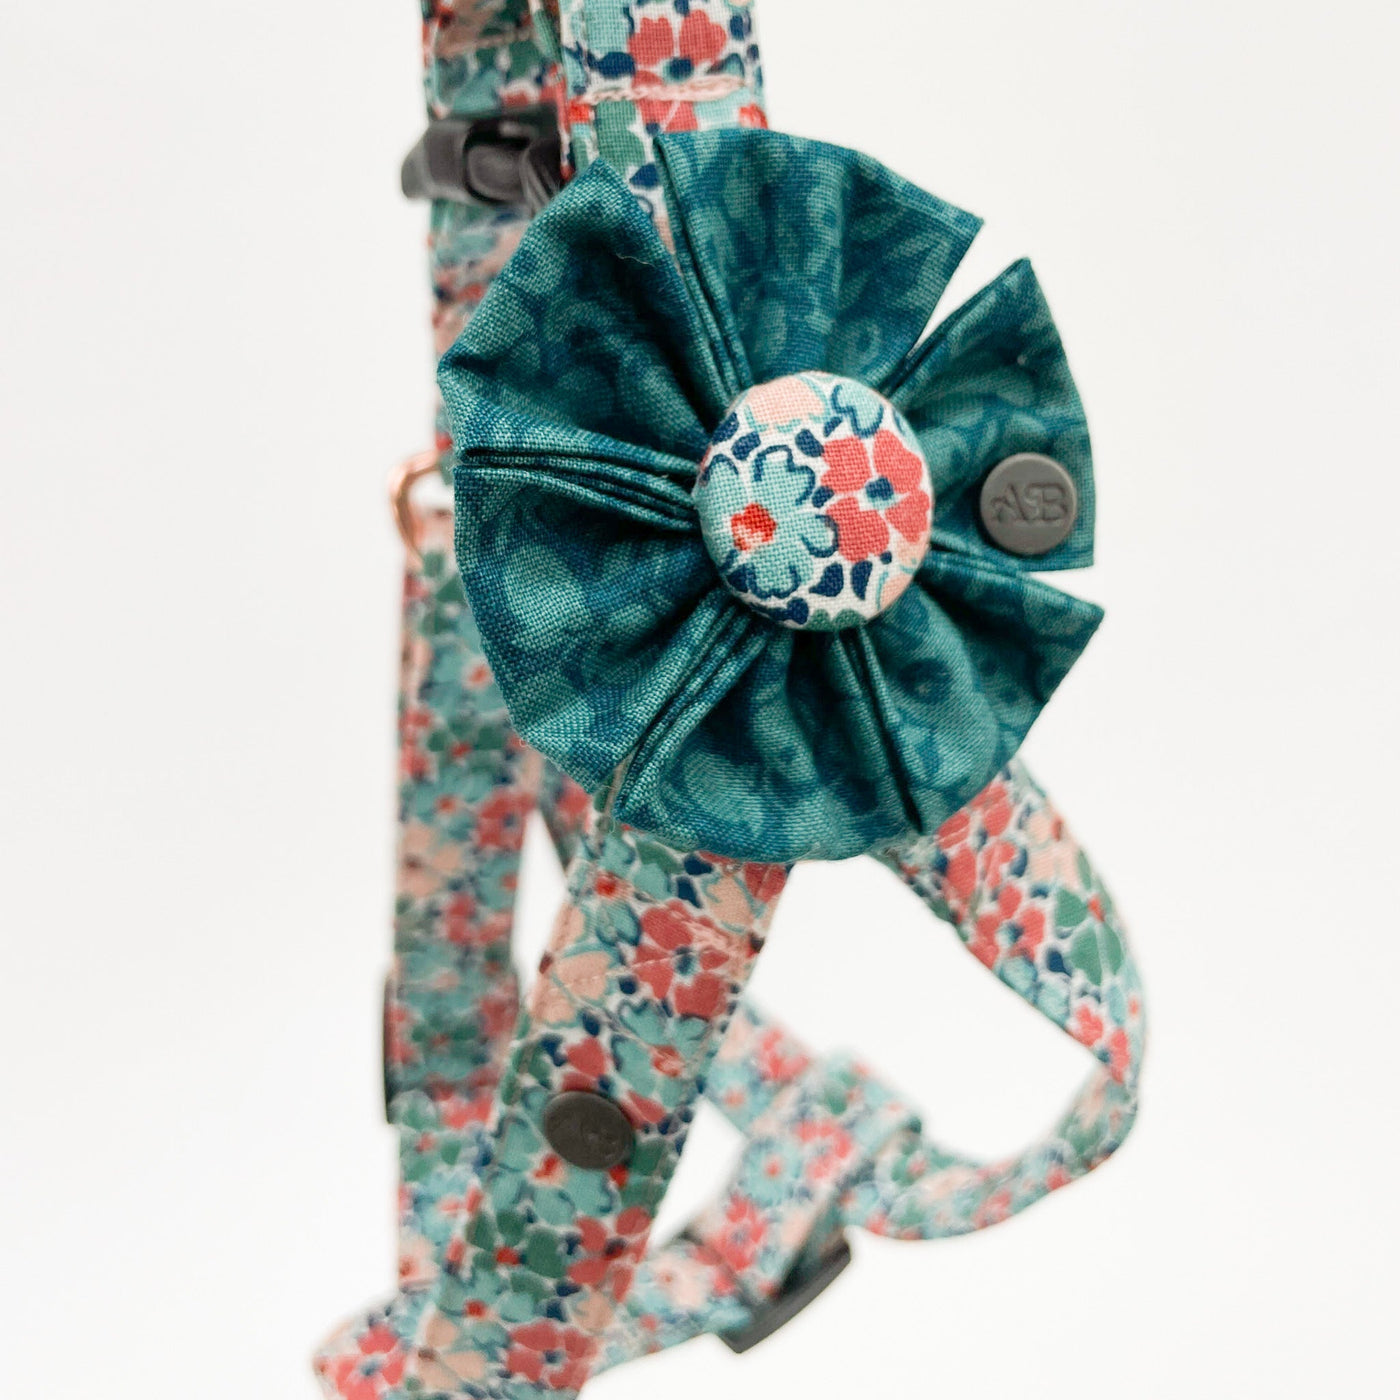 Liberty Autumn Emerald Dog Collar Flower Accessory shown attached to  step-in harness in Liberty floral  fabric.